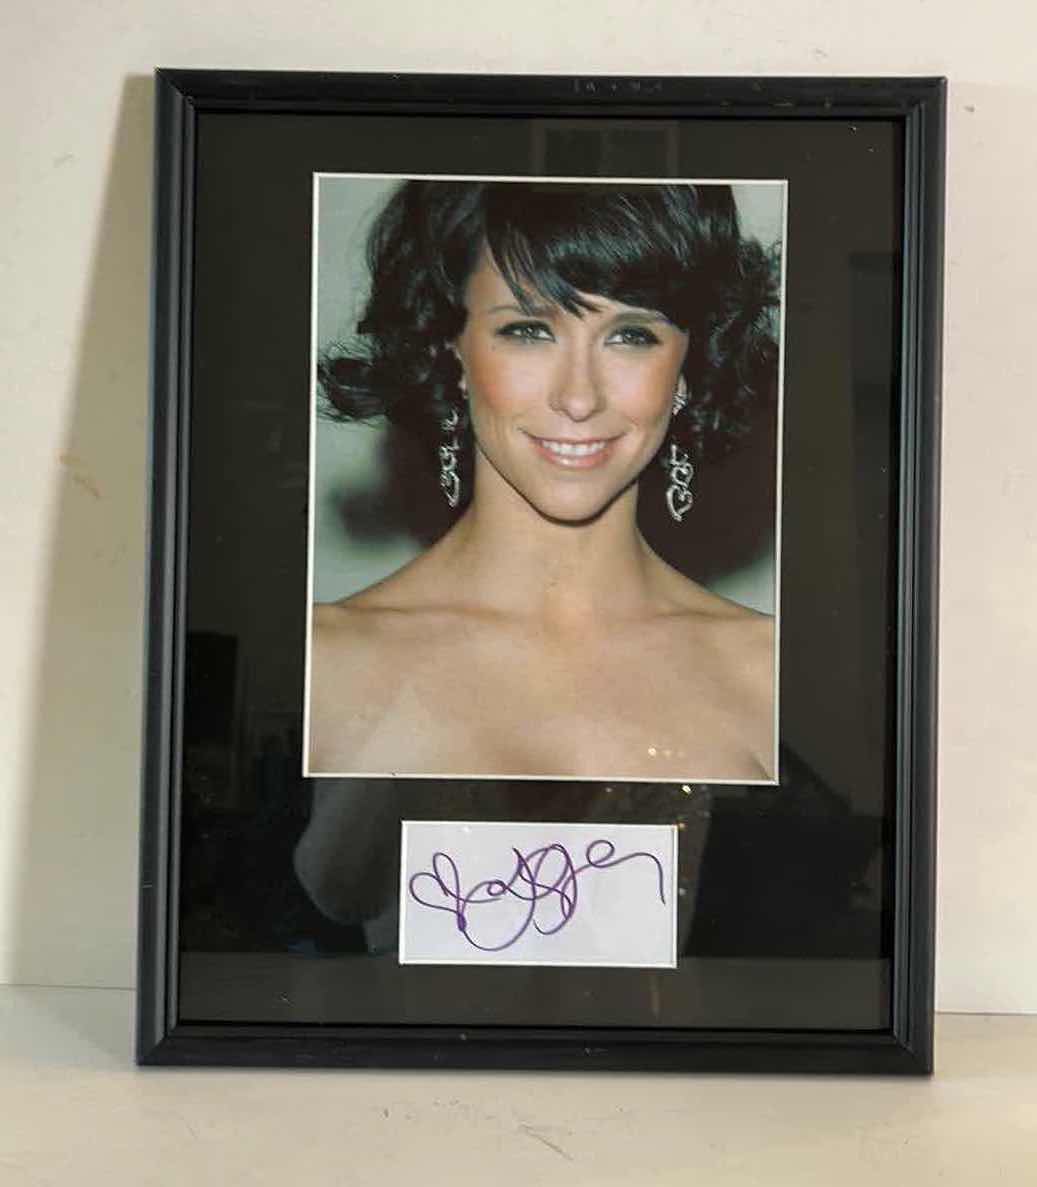 Photo 1 of CELEBRITY AUTOGRAPHED PHOTO “JENNIFER LOVE HEWITT WITH LETTER OF AUTHENTICITY FRAMED 12” x 15”